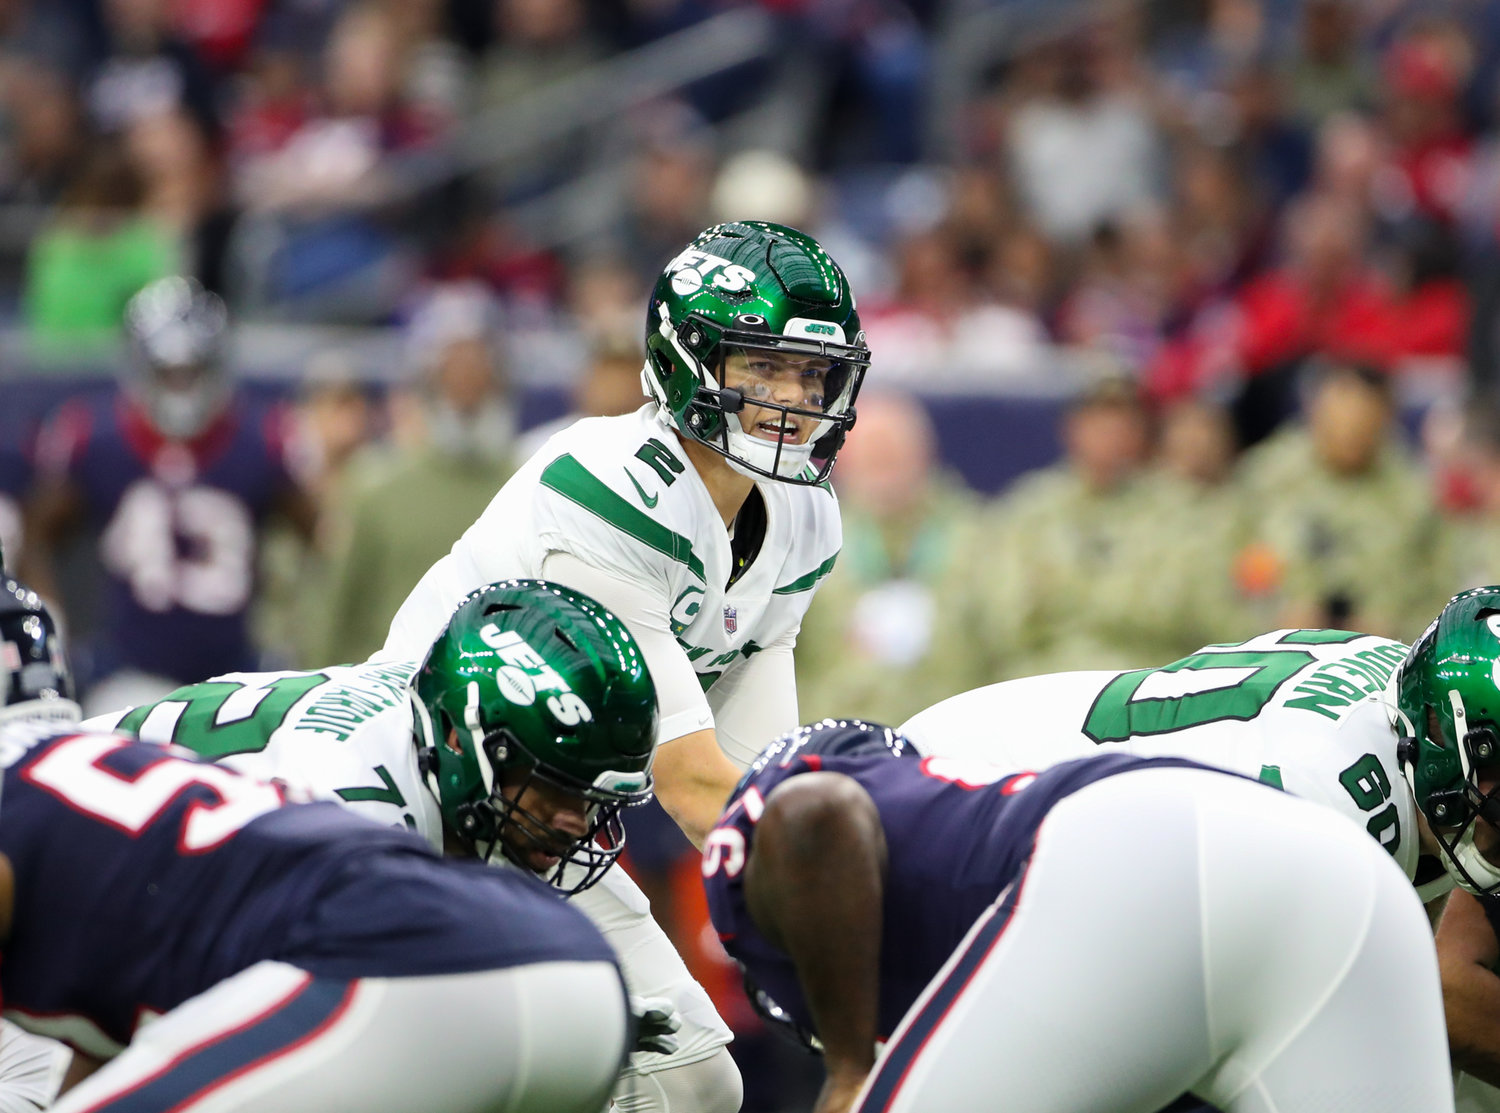 New York Jets quarterback Zach Wilson (2) at the line of scrimmage during an NFL game between the Houston Texans and the New York Jets on November 28, 2021 in Houston, Texas. The Jets won, 21-14